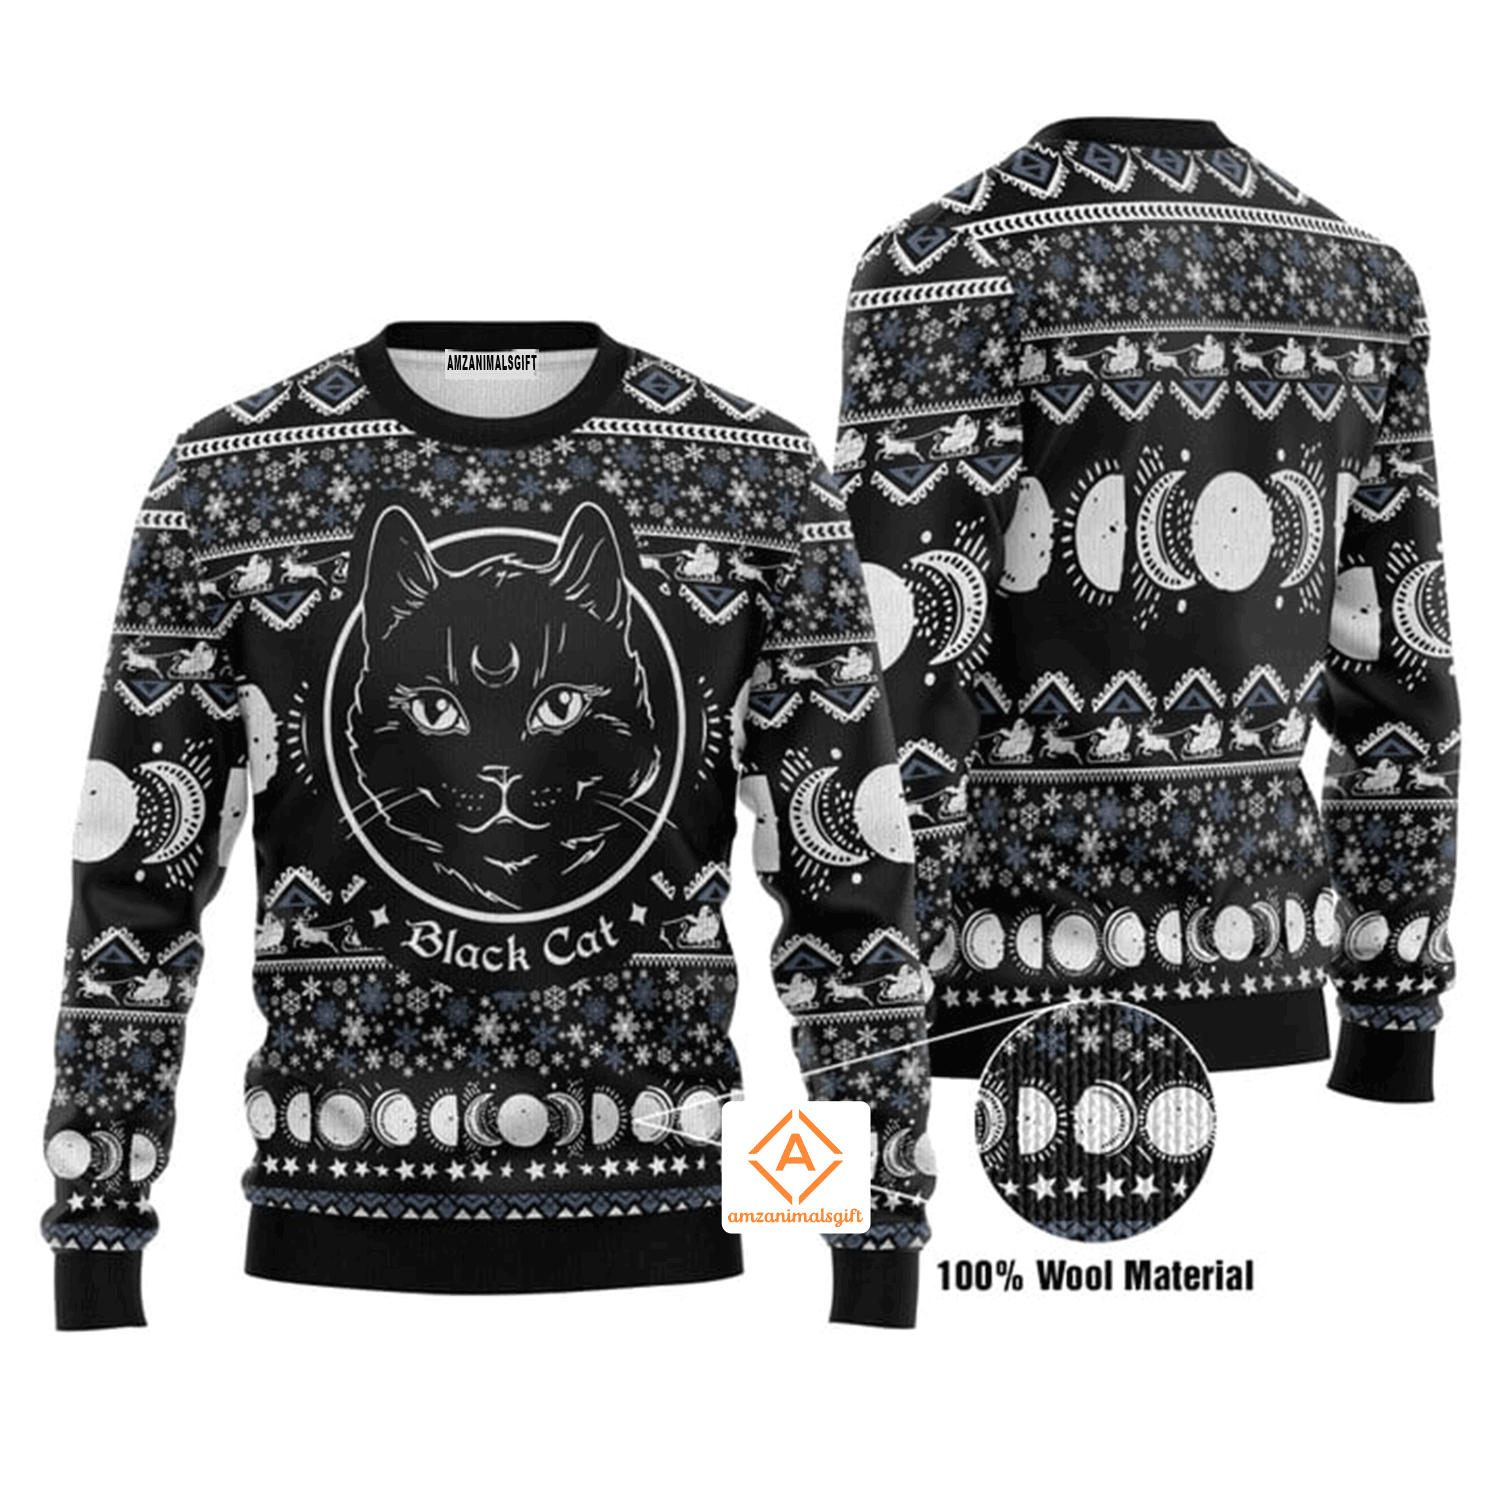 Moon Phase Cute Black Cat Christmas Sweater, Ugly Sweater For Men & Women, Perfect Outfit For Christmas New Year Autumn Winter